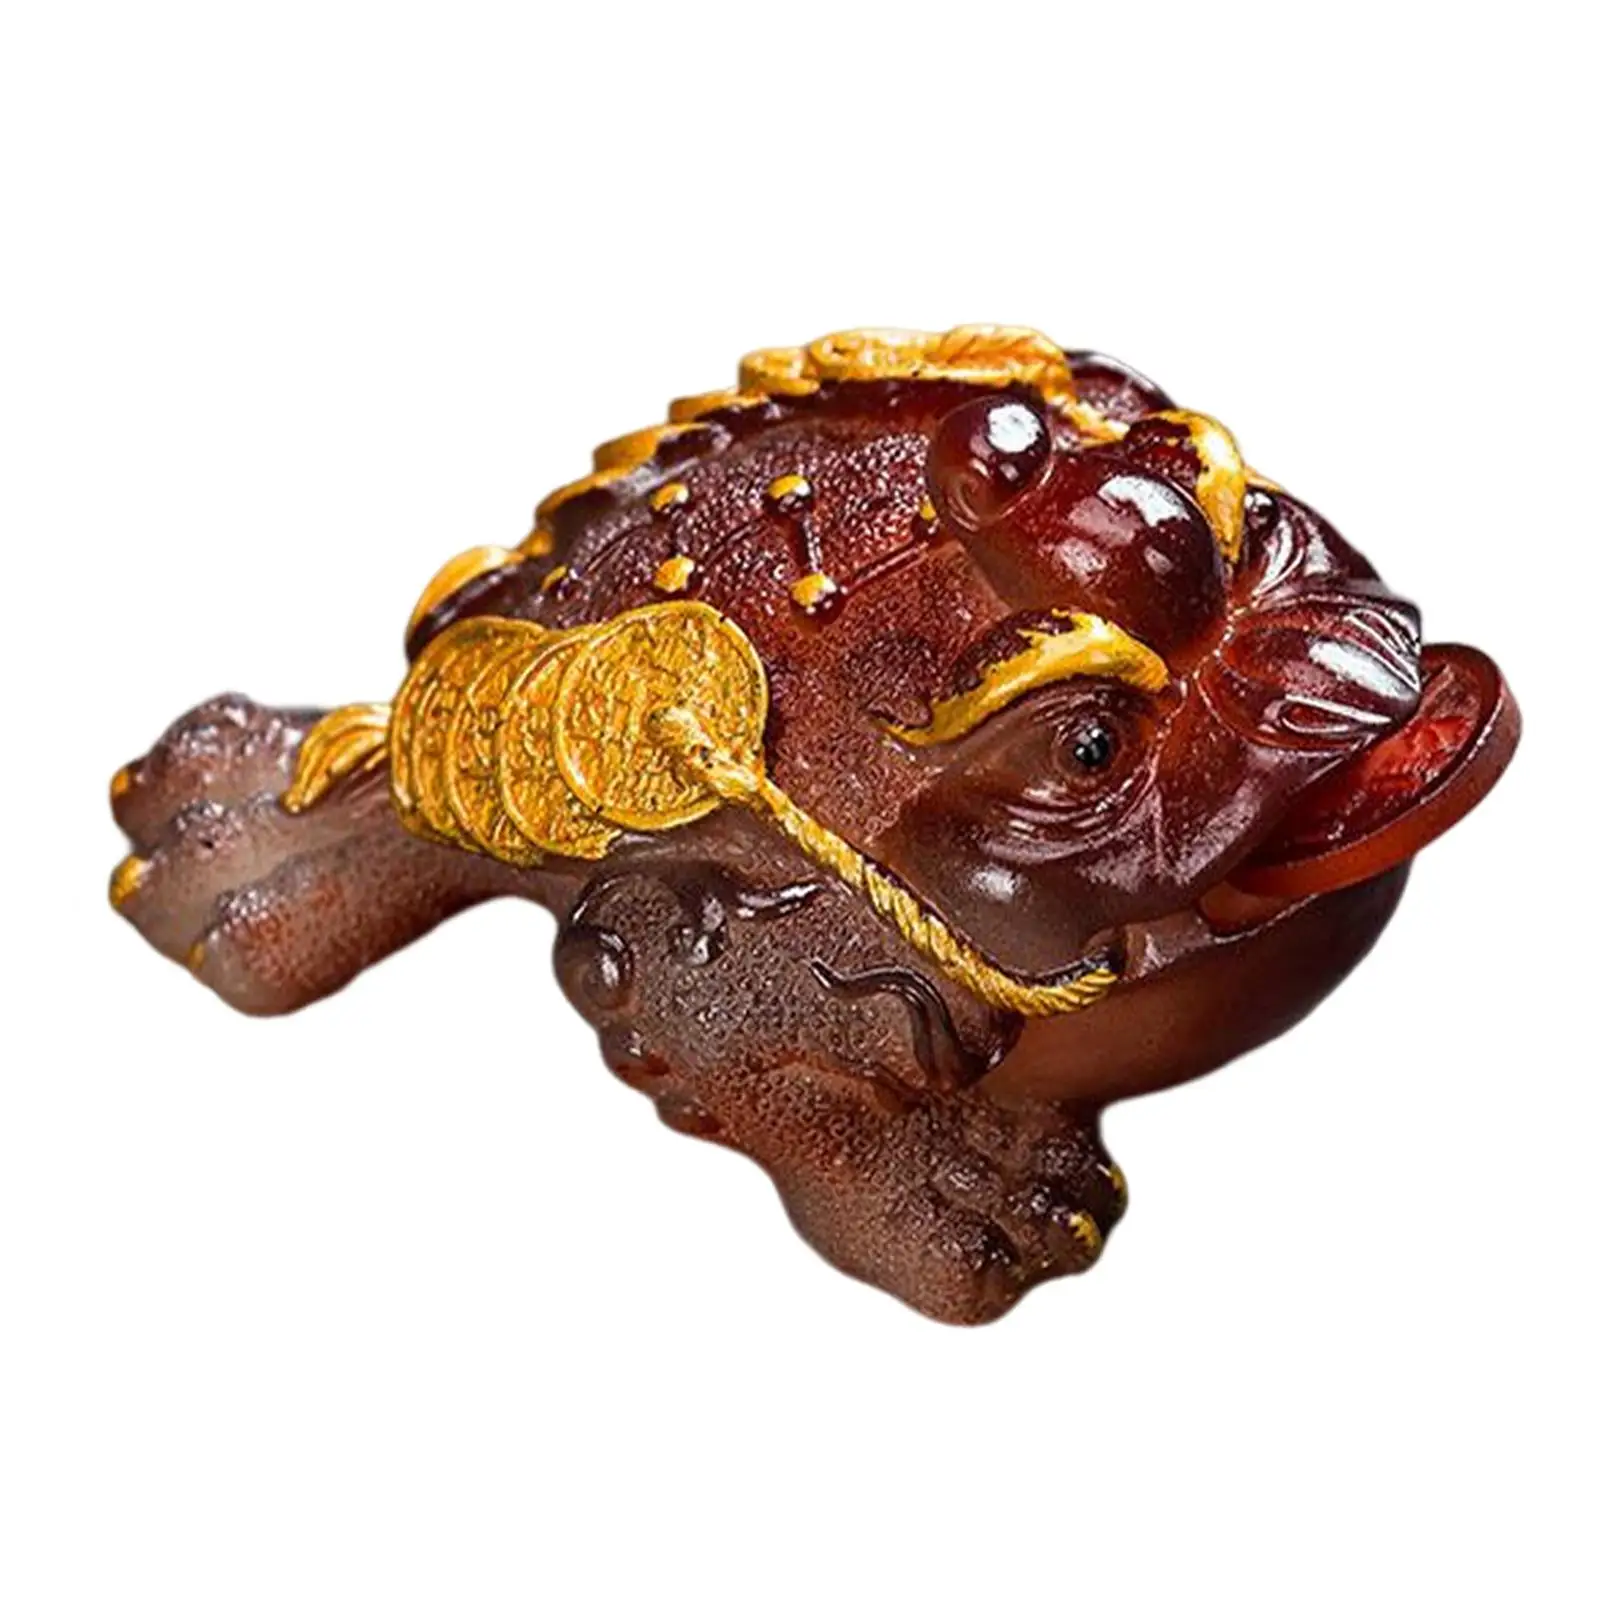 Changing Color Toad Figurine Fortune Resin Crafts Tea Pet Ornament Luck Toad for Tea Table Tea Tray Tea Accessories Decor